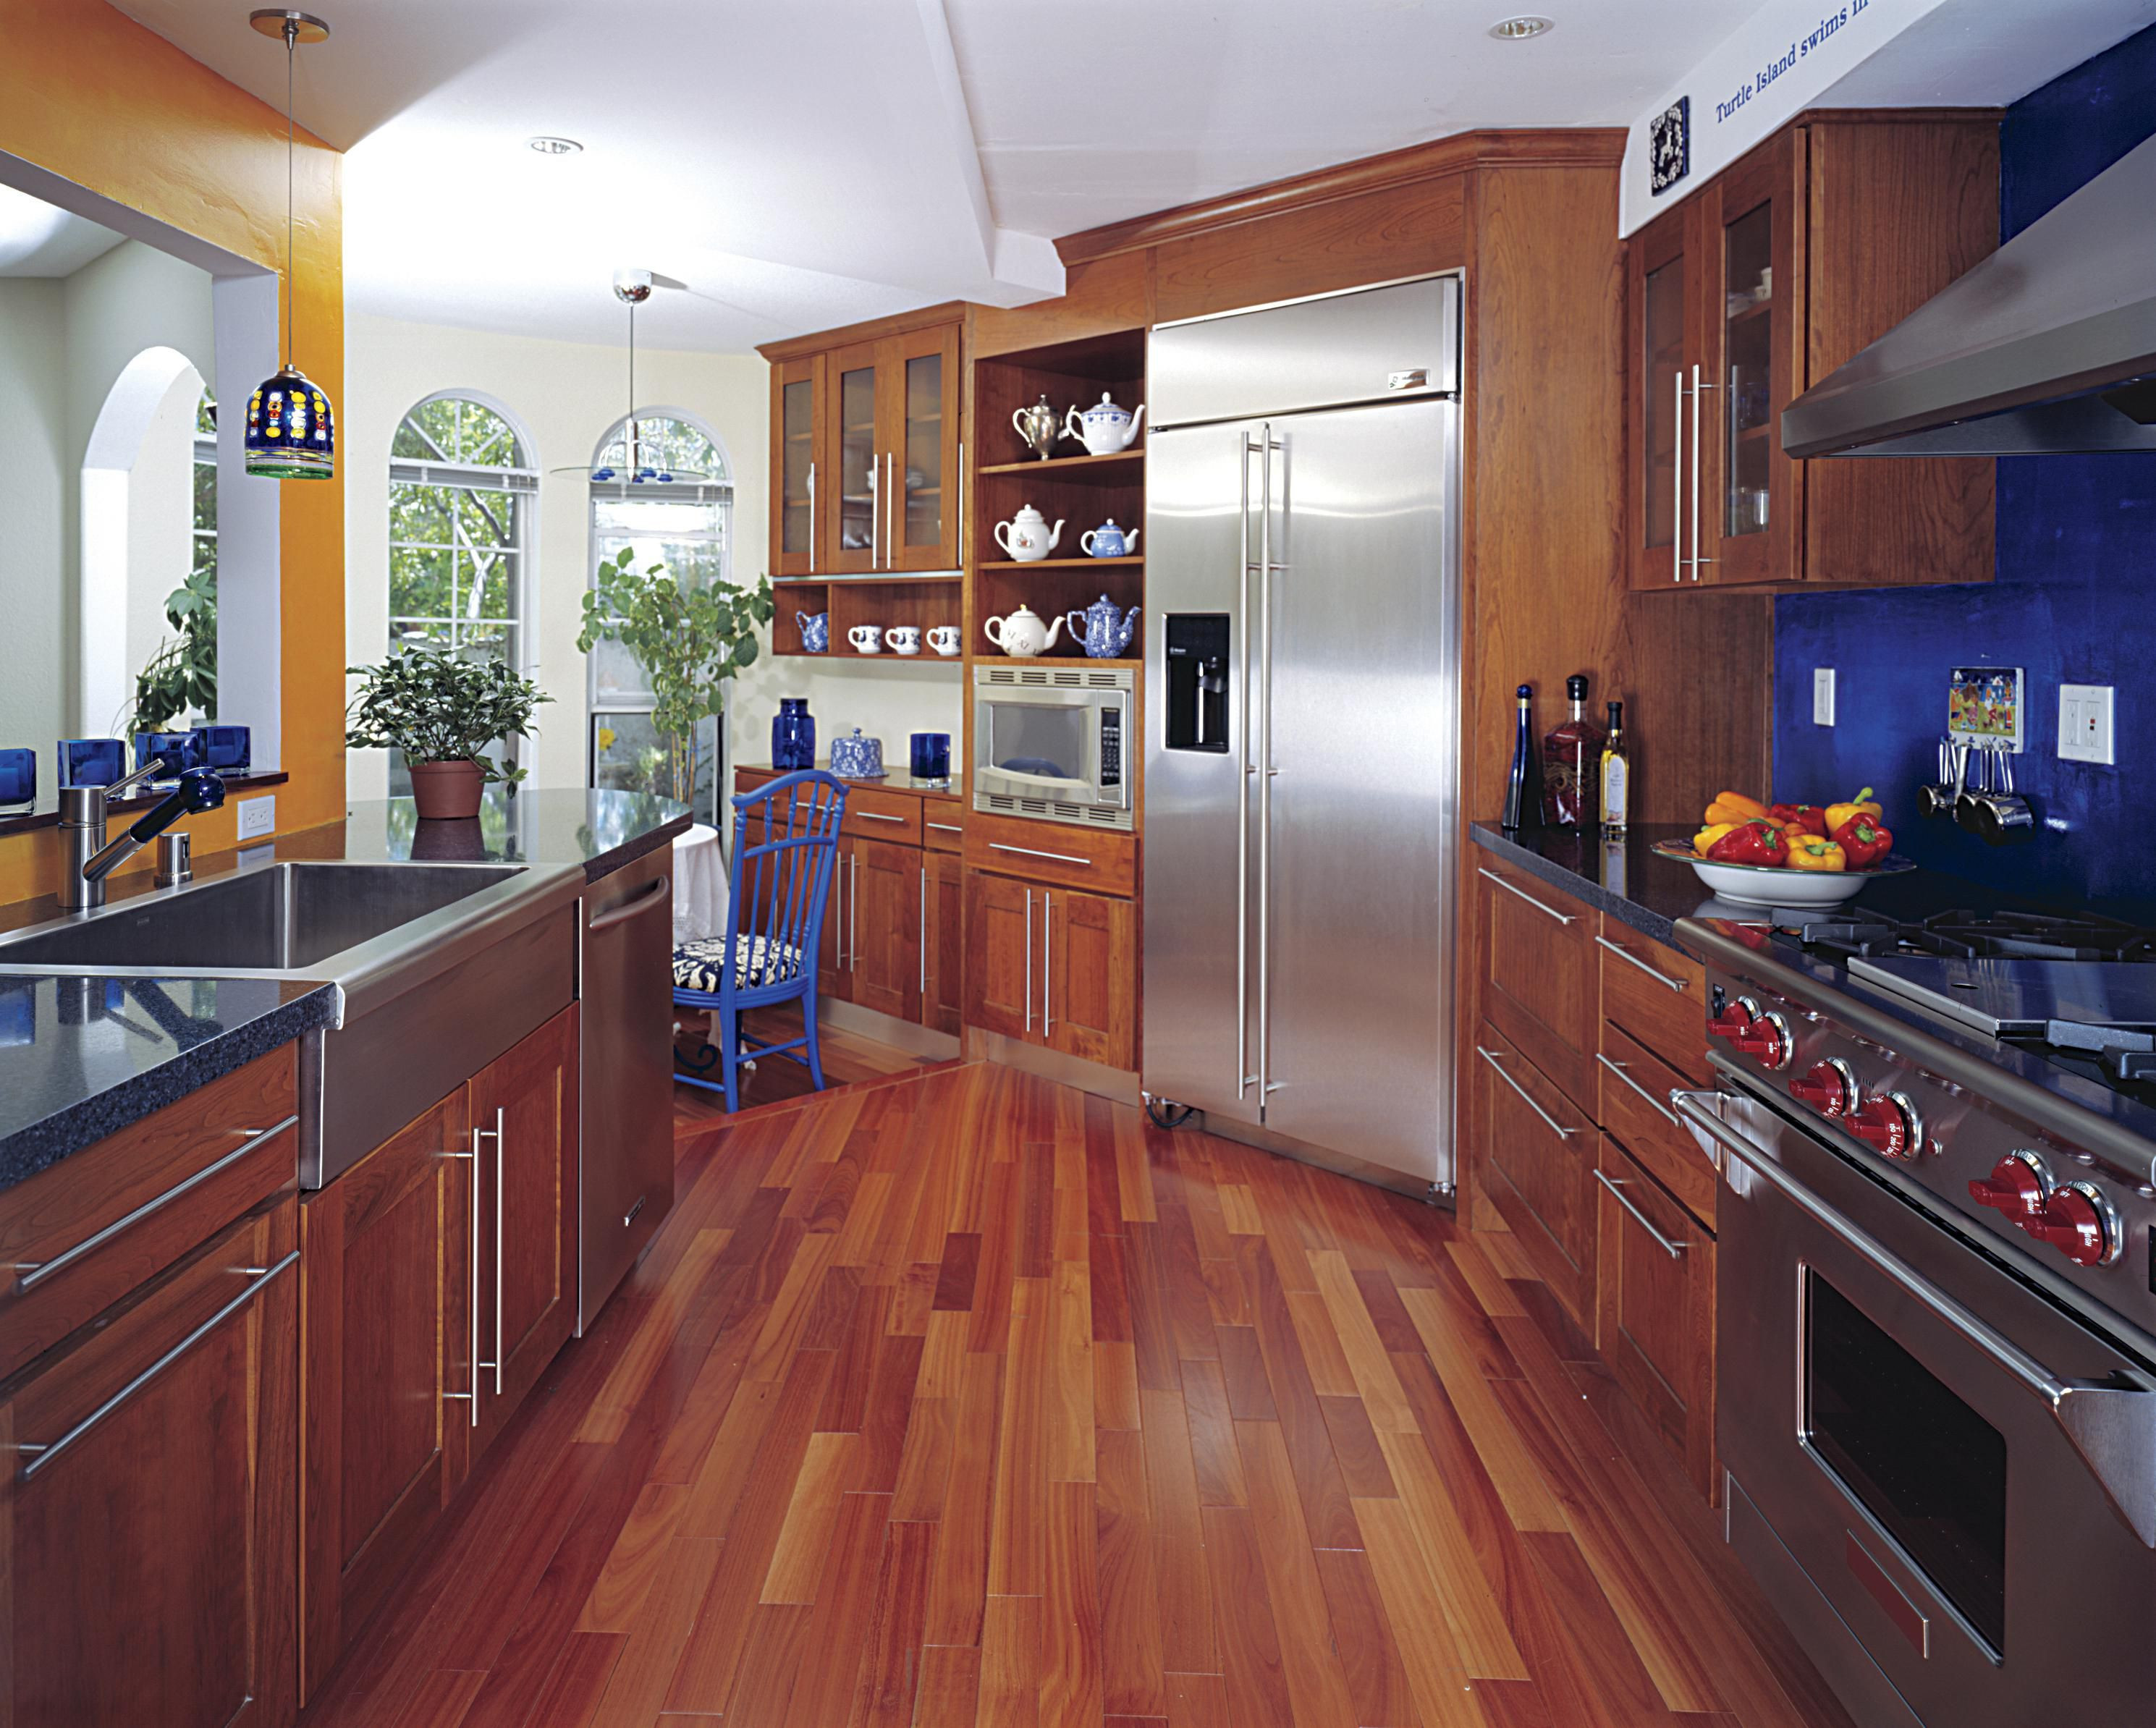 27 attractive Best Hardwood Floor Options 2024 free download best hardwood floor options of hardwood floor in a kitchen is this allowed throughout 186828472 56a49f3a5f9b58b7d0d7e142